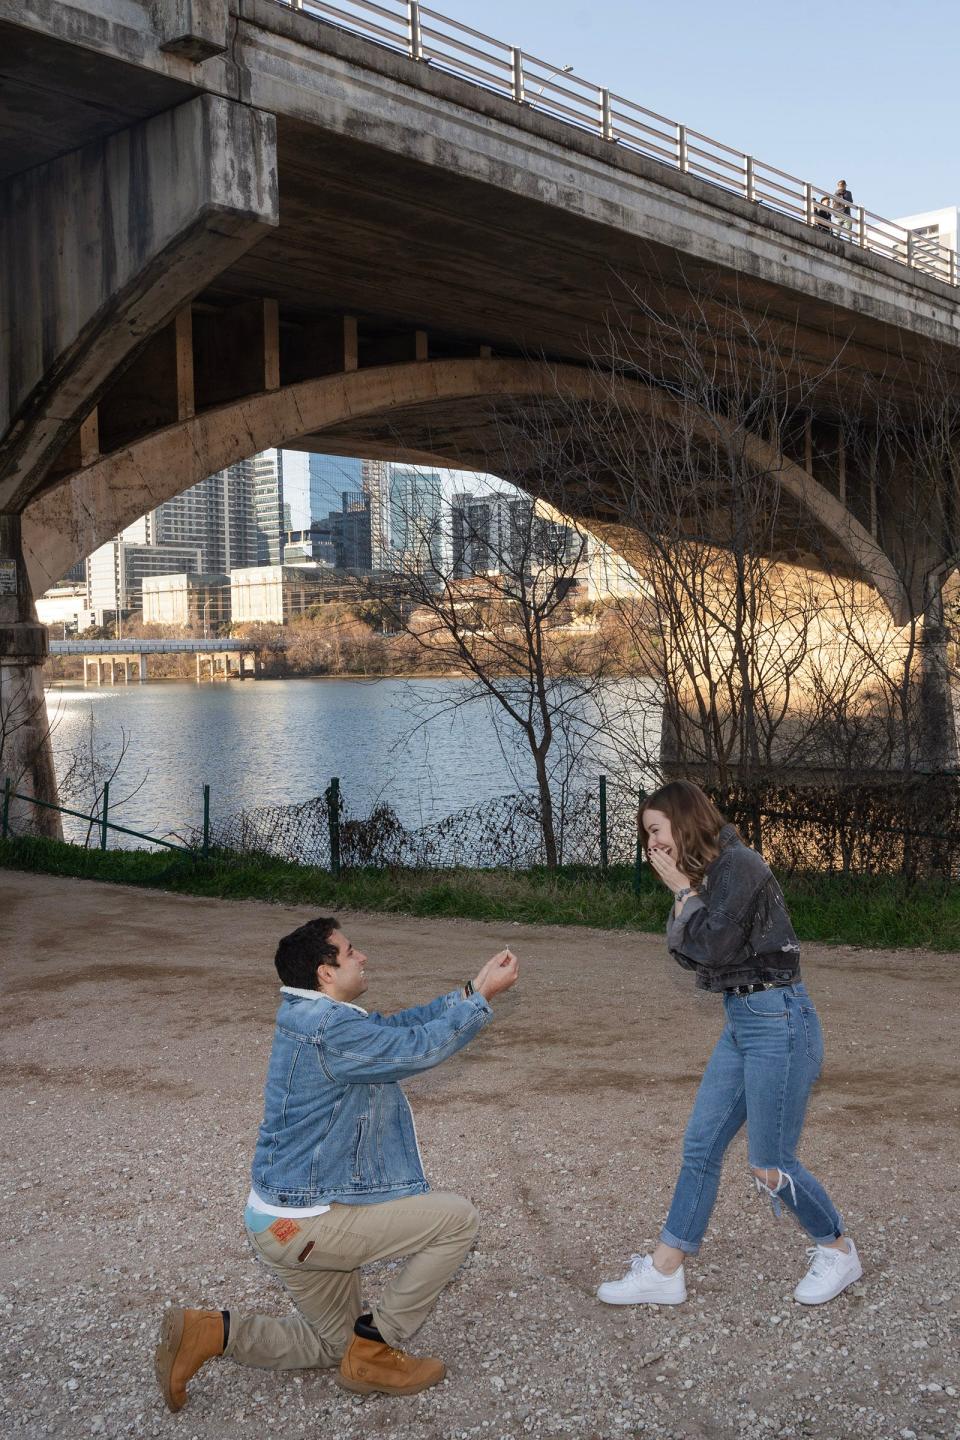 A proposal?! We got carried away during our photo shoot. A proposal felt right at the time.